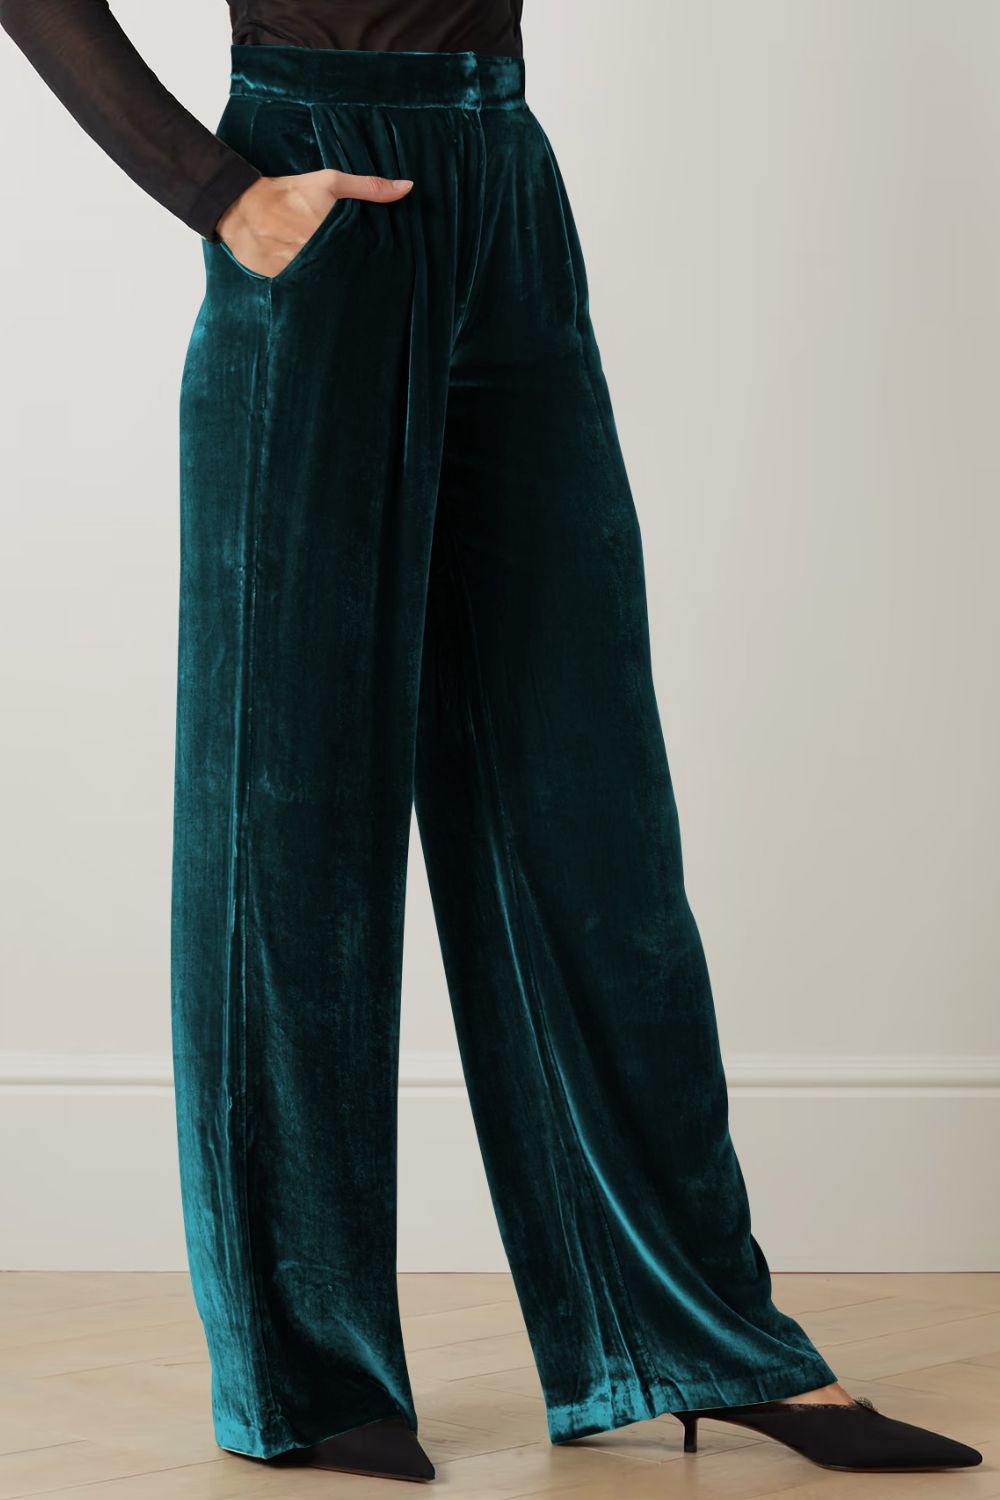 Loose Fit High Waist Long Pants with Pockets - Bottoms - Pants - 22 - 2024